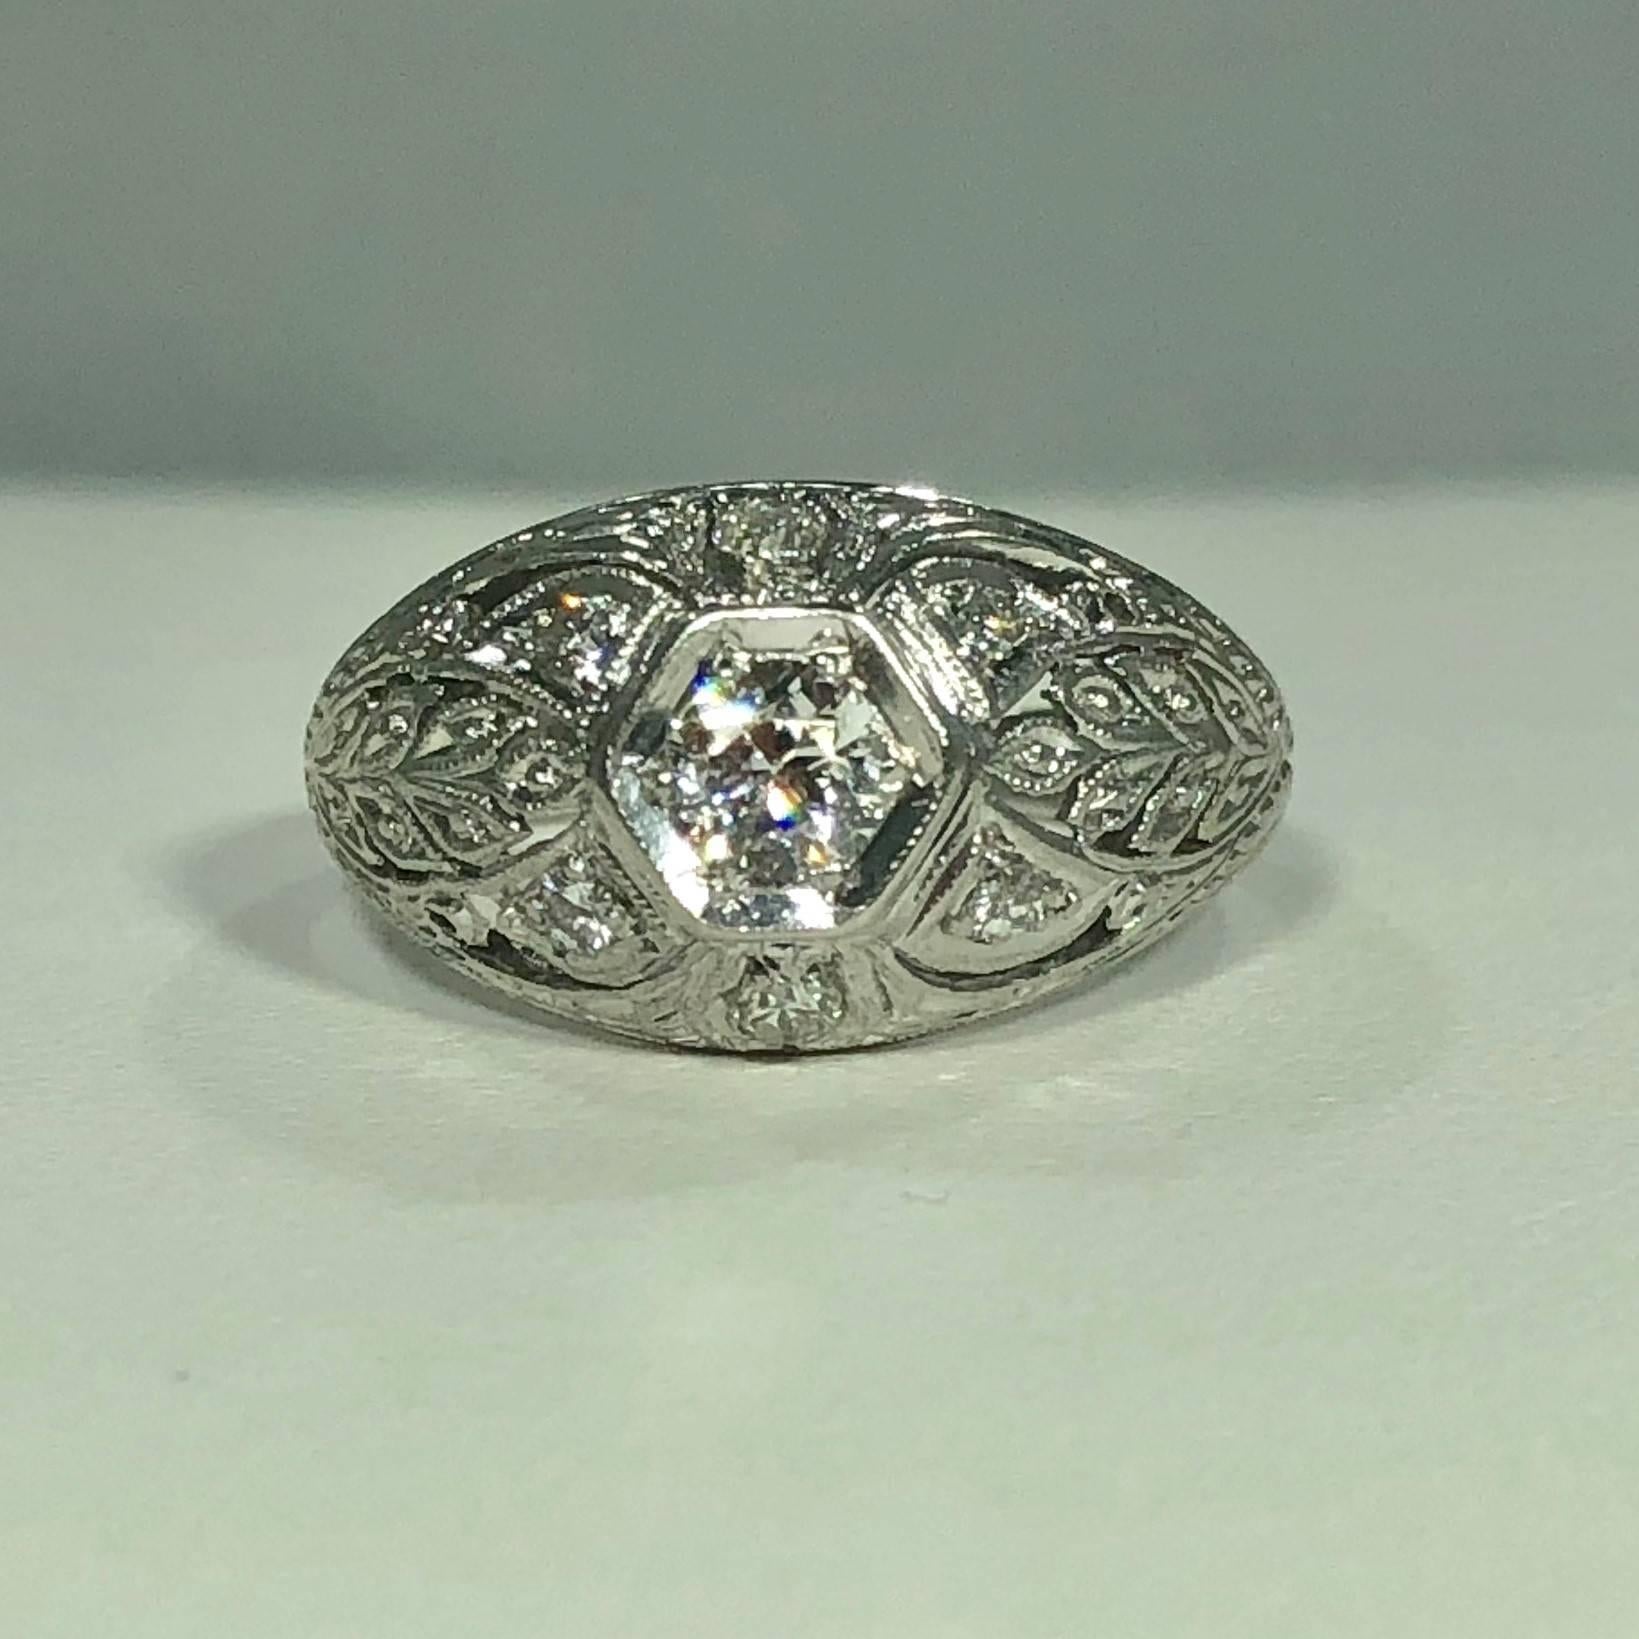 Art Deco Platinum and 18 karat European cut diamond dome engagement ring. This true Art Deco piece is stunning. Created in Platinum and 18 karat white gold with exquisite filigree detail. The center stone is a European cut diamond .25 carat approx.,